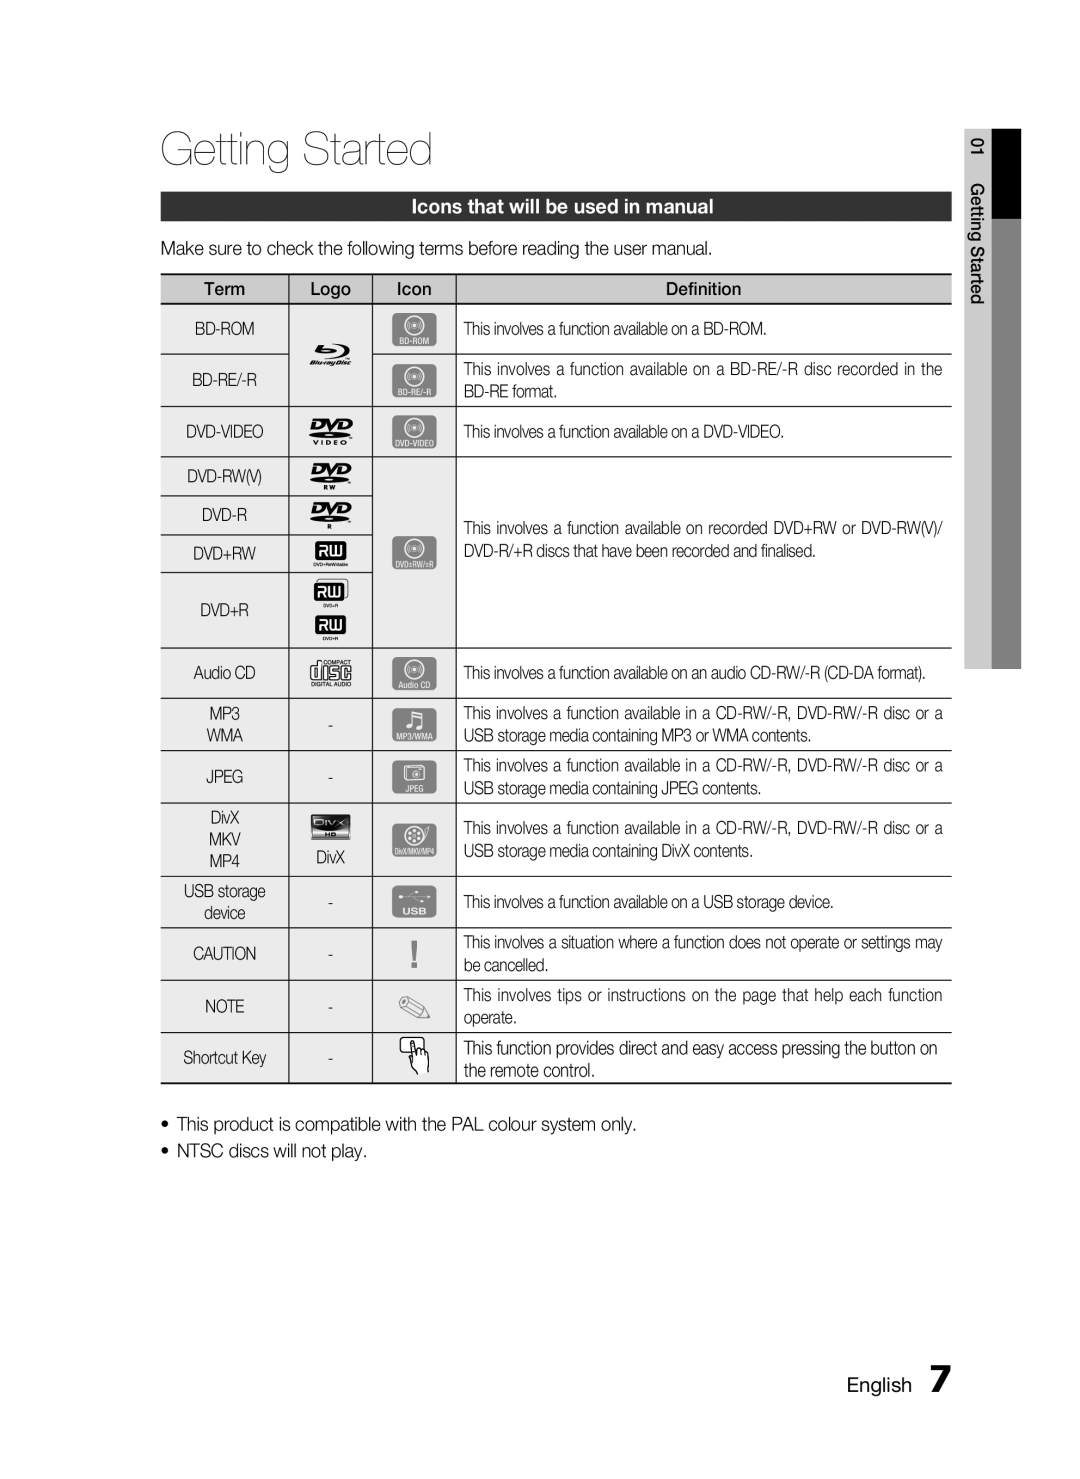 Samsung HT-C5200 user manual Getting Started, Icons that will be used in manual, English 